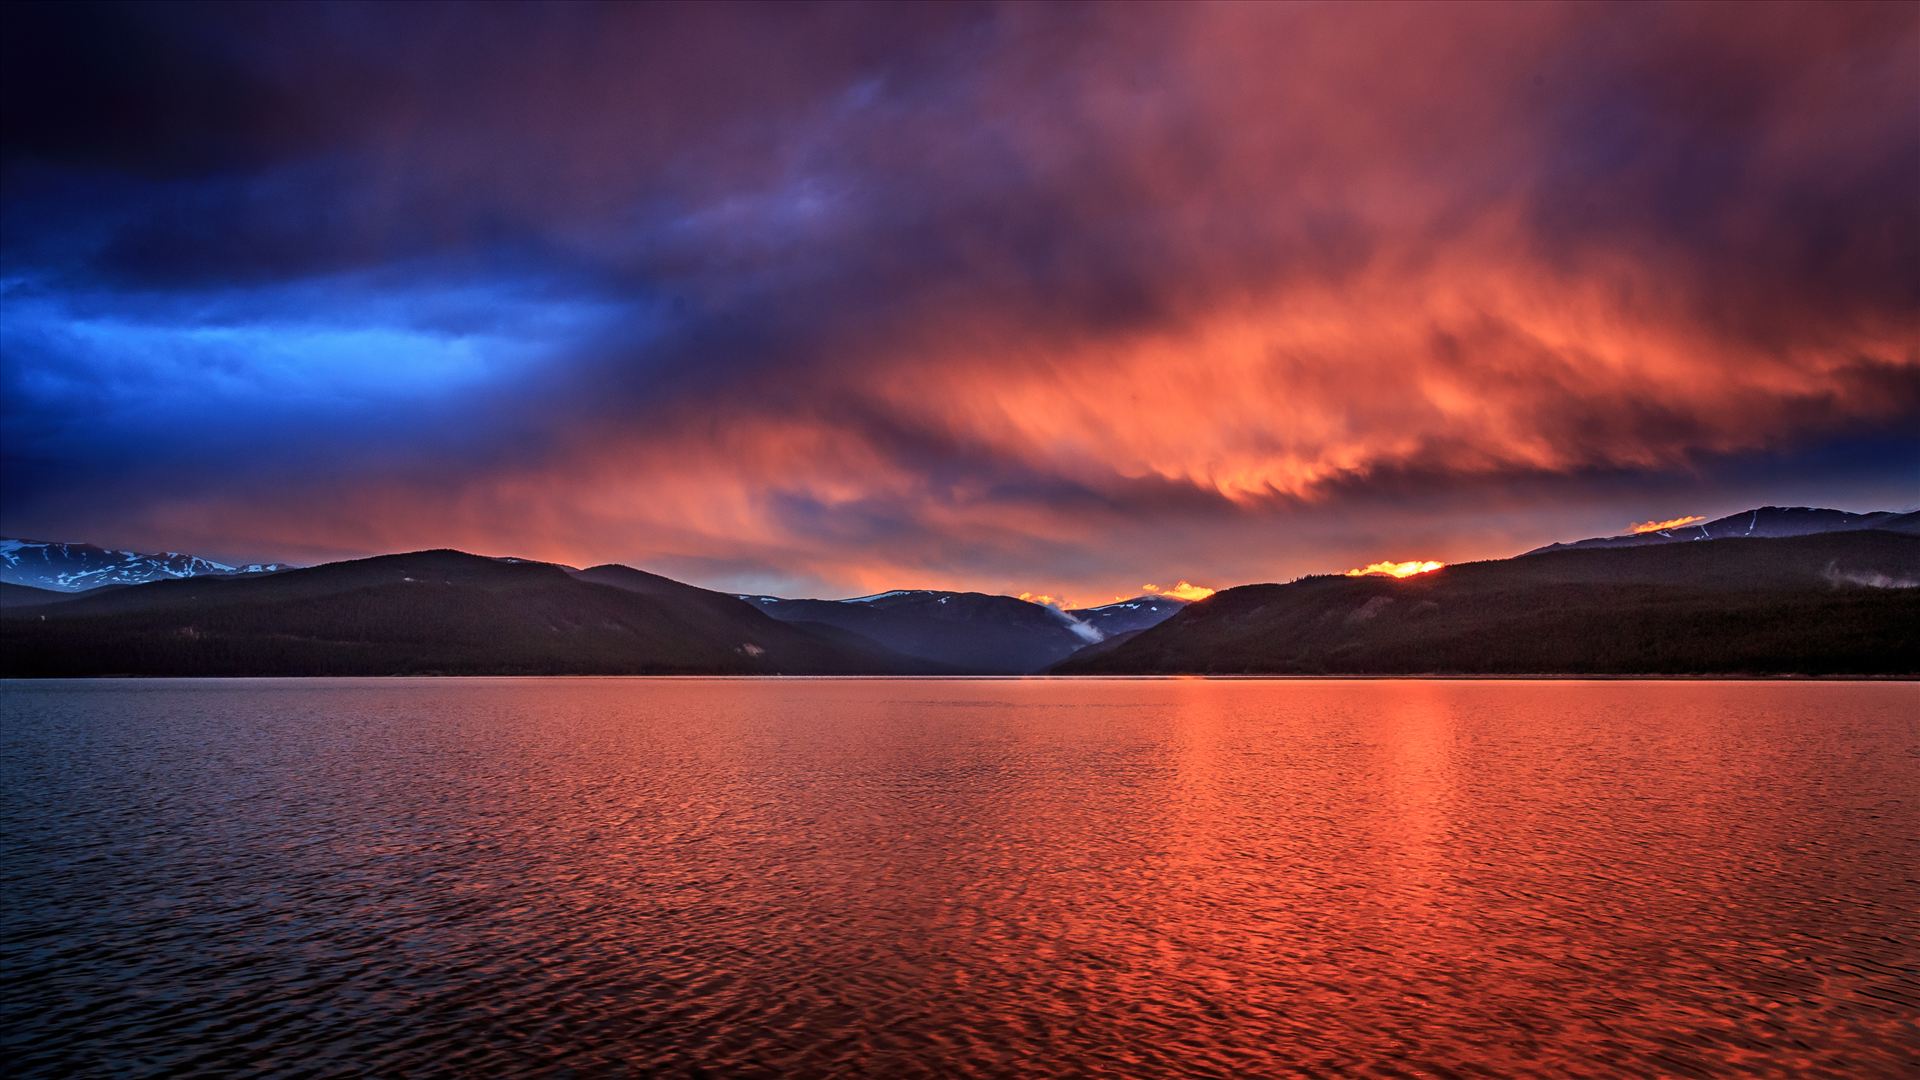 Sunset on Turquoise II - Sunset on the calm protected waters of Turqouise Lake, Leadville Colorado. by Scott Smith Photos